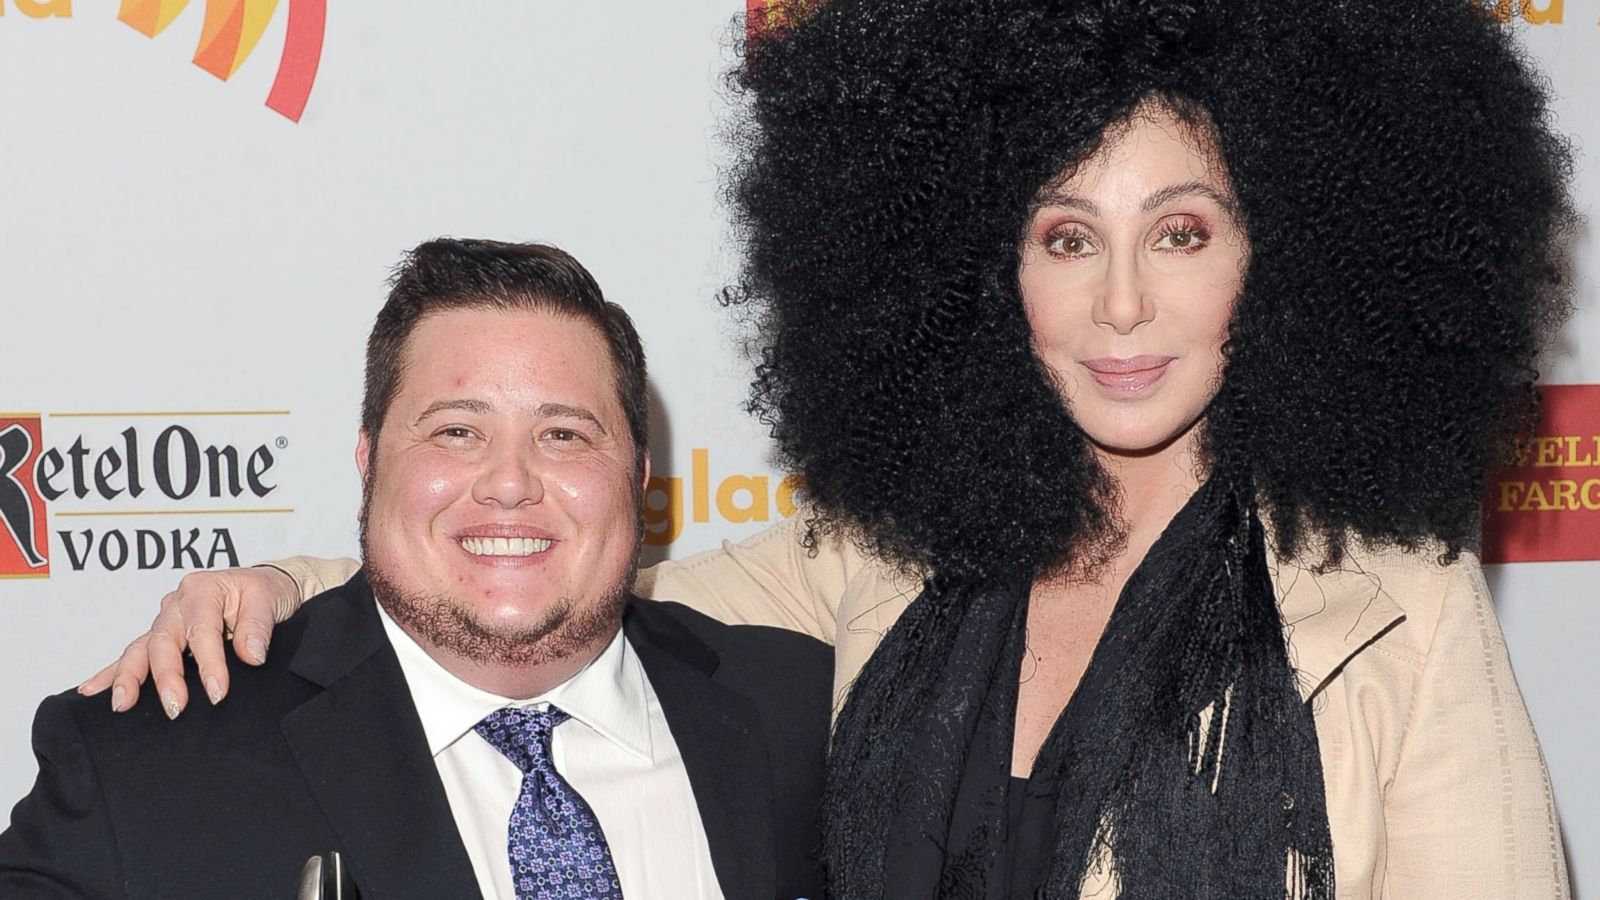 Cher is an immensely popular gay icon and loving mother to her trans son